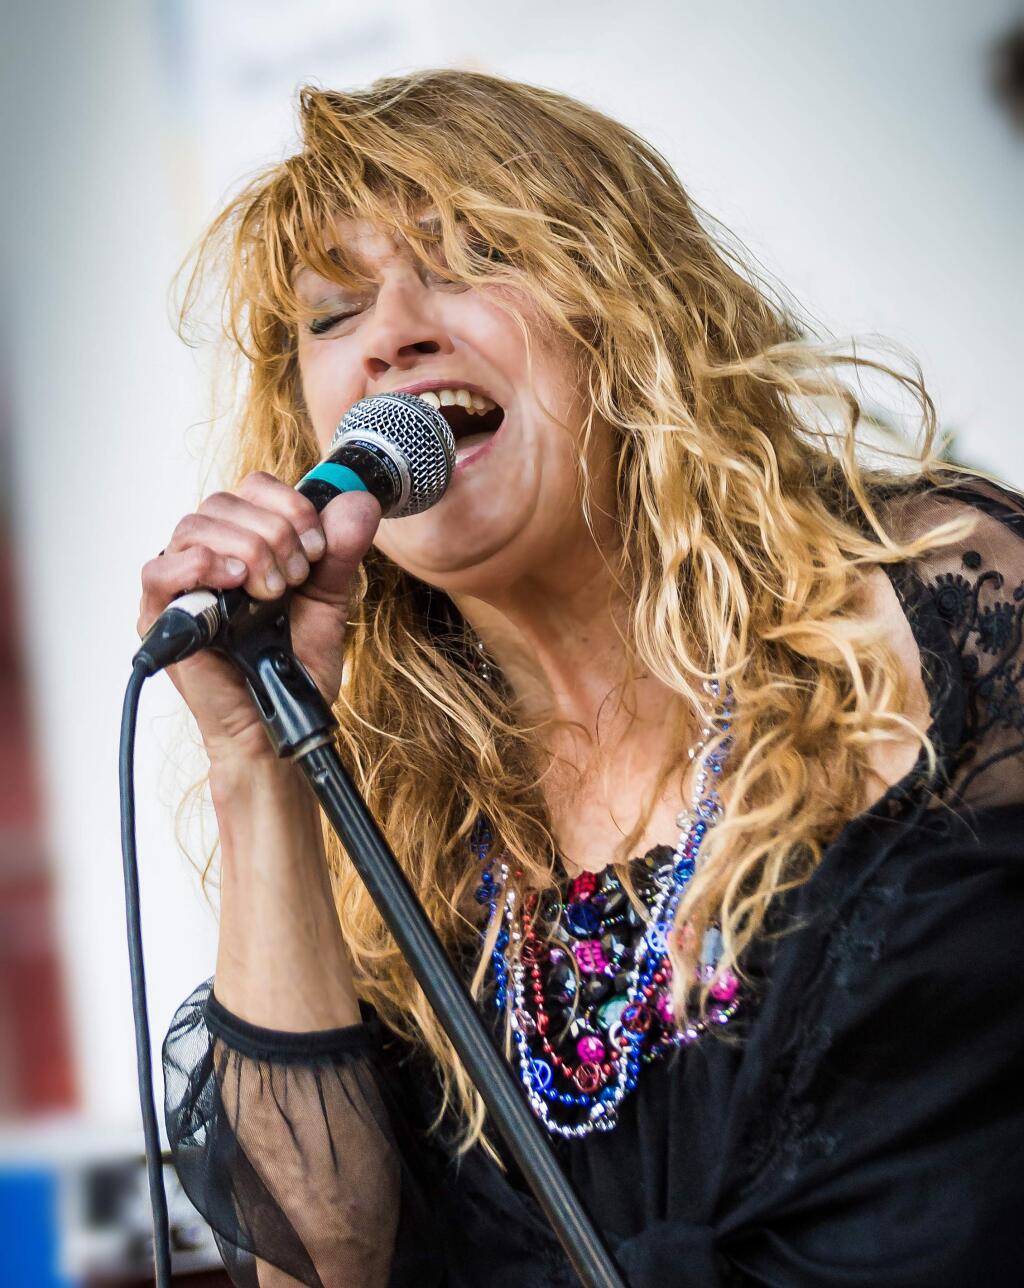 San Francisco native Lydia Pense, known as a rock-soul-jazz singer who, since 1969, has performed with the band Cold Blood and has been compared to powerful singers including Janis Joplin and Aretha Franklin. (Frankie James)